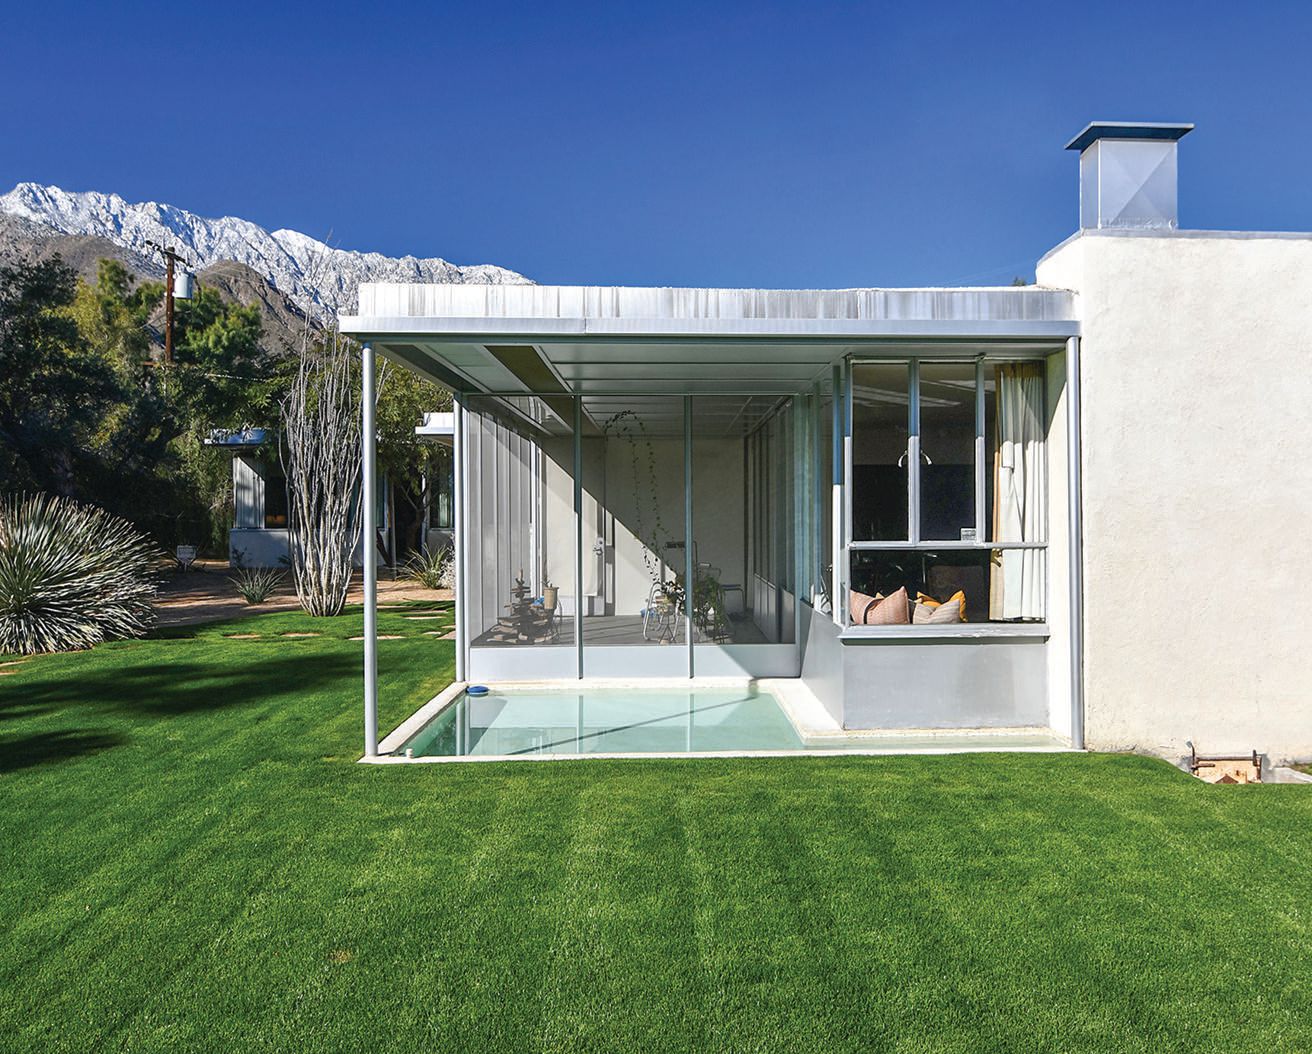 The East Coast vs. West Coast Modernism House Design at Midcentury event will feature iconic properties like the Grace Miller House designed by Richard Neutra. PHOTO BY COLIN FLAVIN